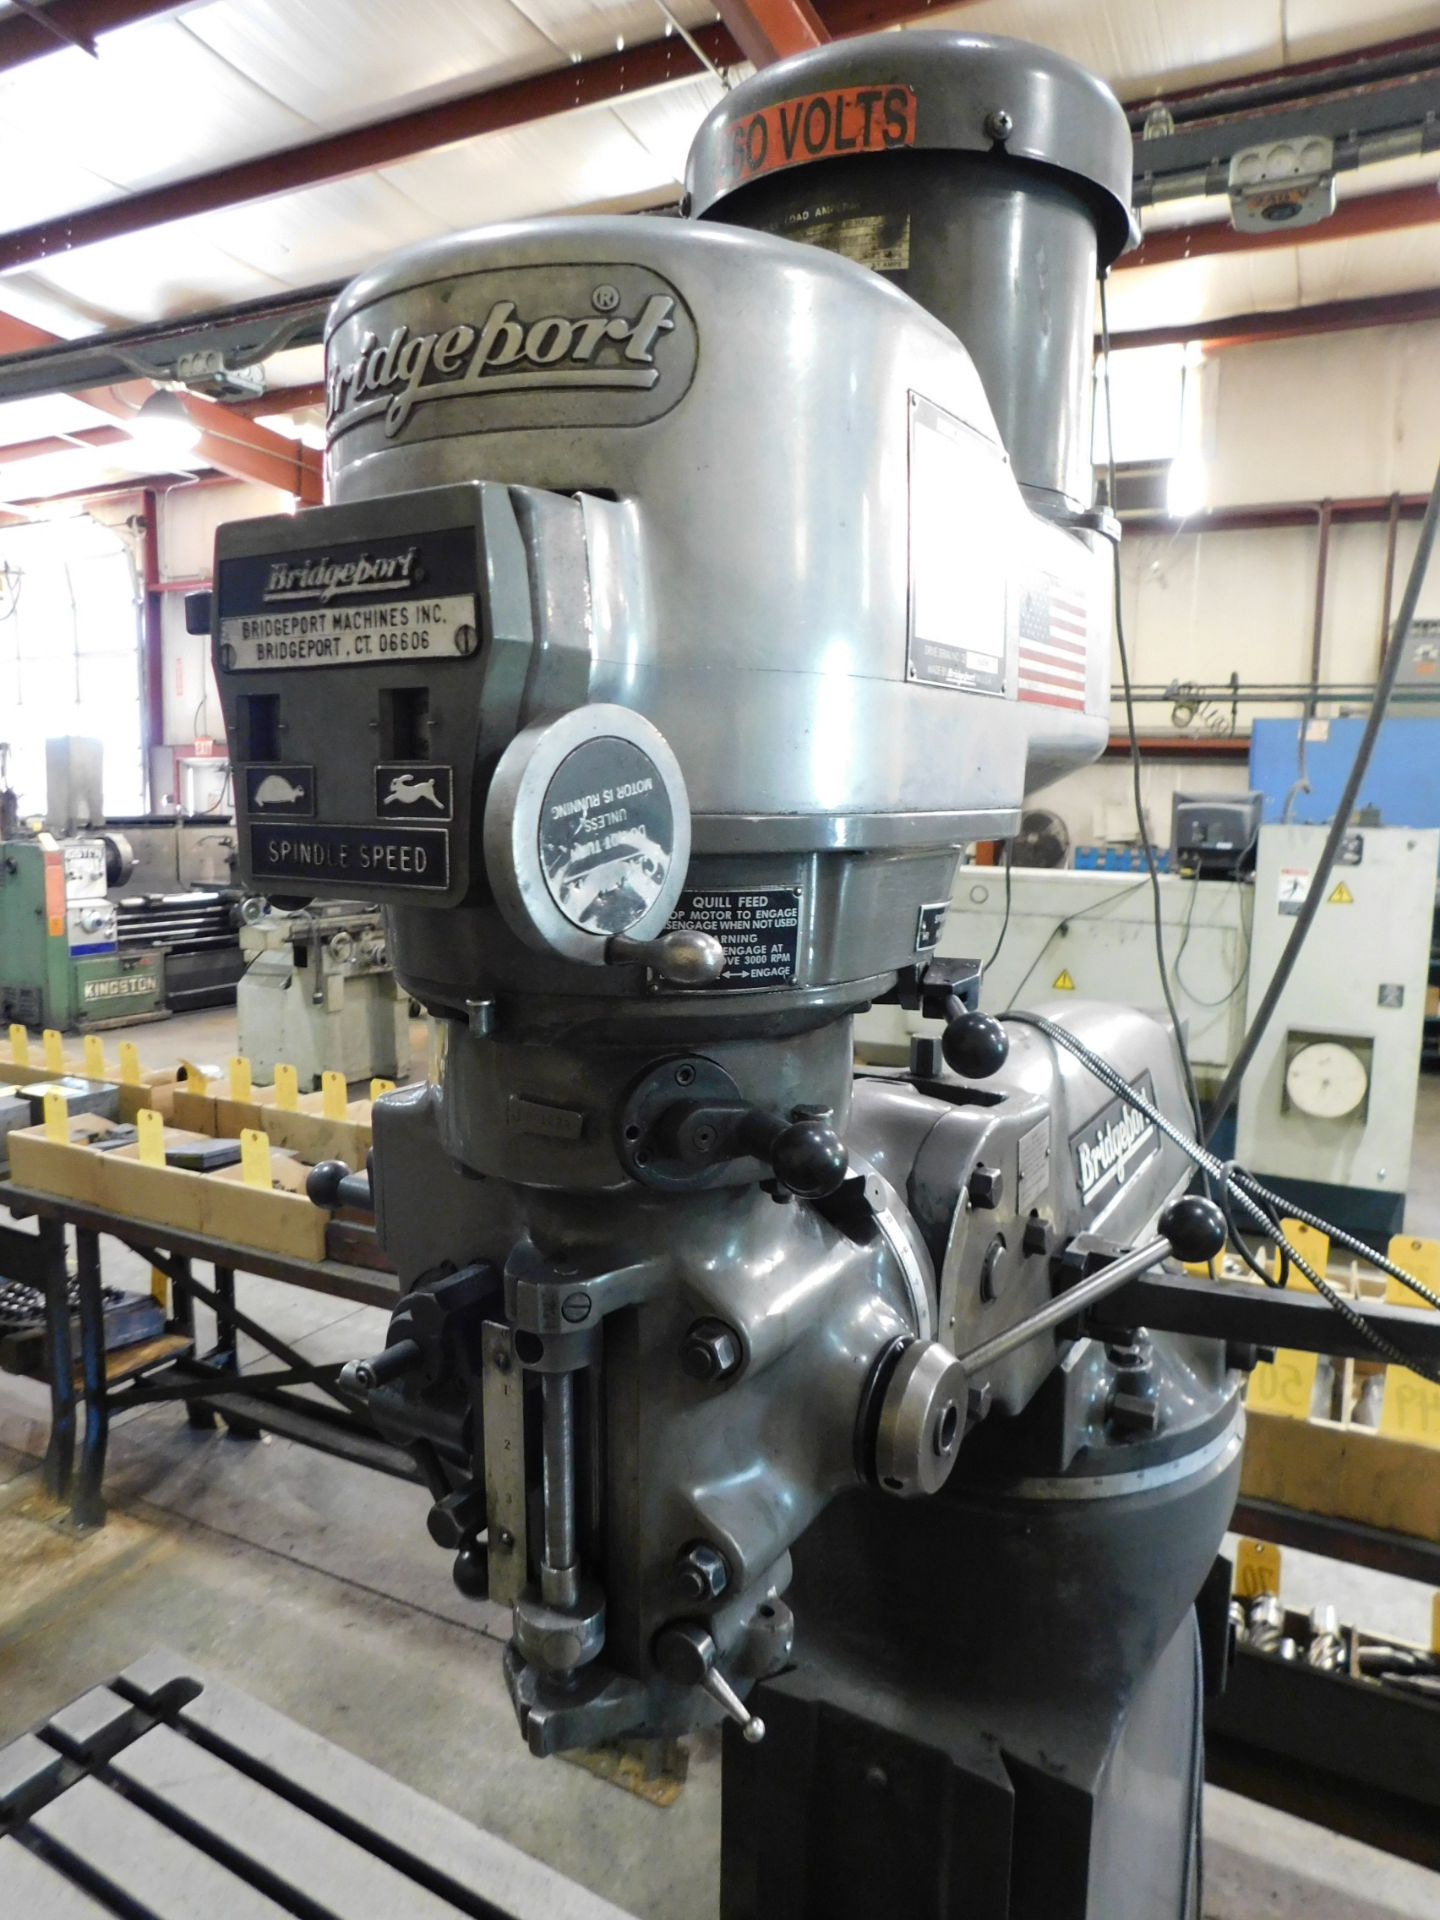 Bridgeport Series I, 2 HP Vertical Mill, s/n BR273024, 9” X 48” Table, Newall D.R.O. - Image 6 of 9